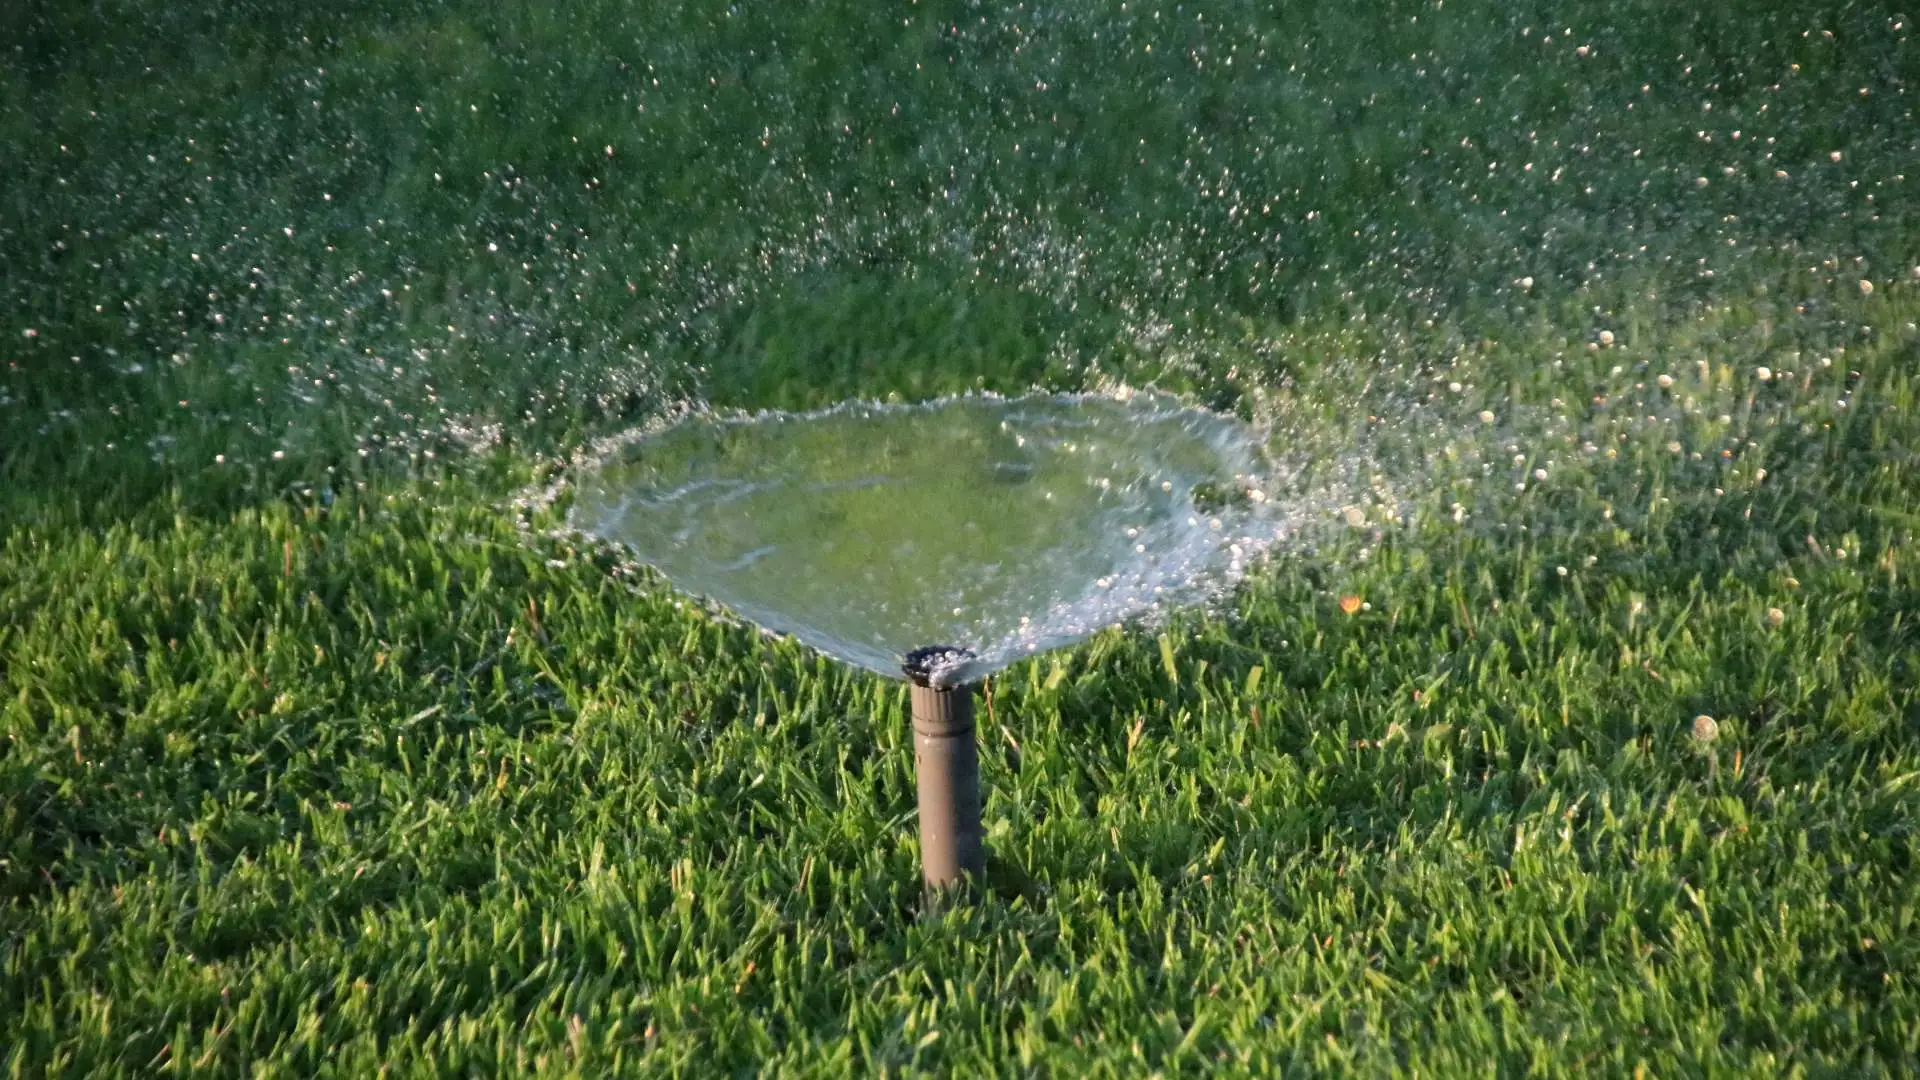 Watering sprinkler system in lawn in Waukee, IA.